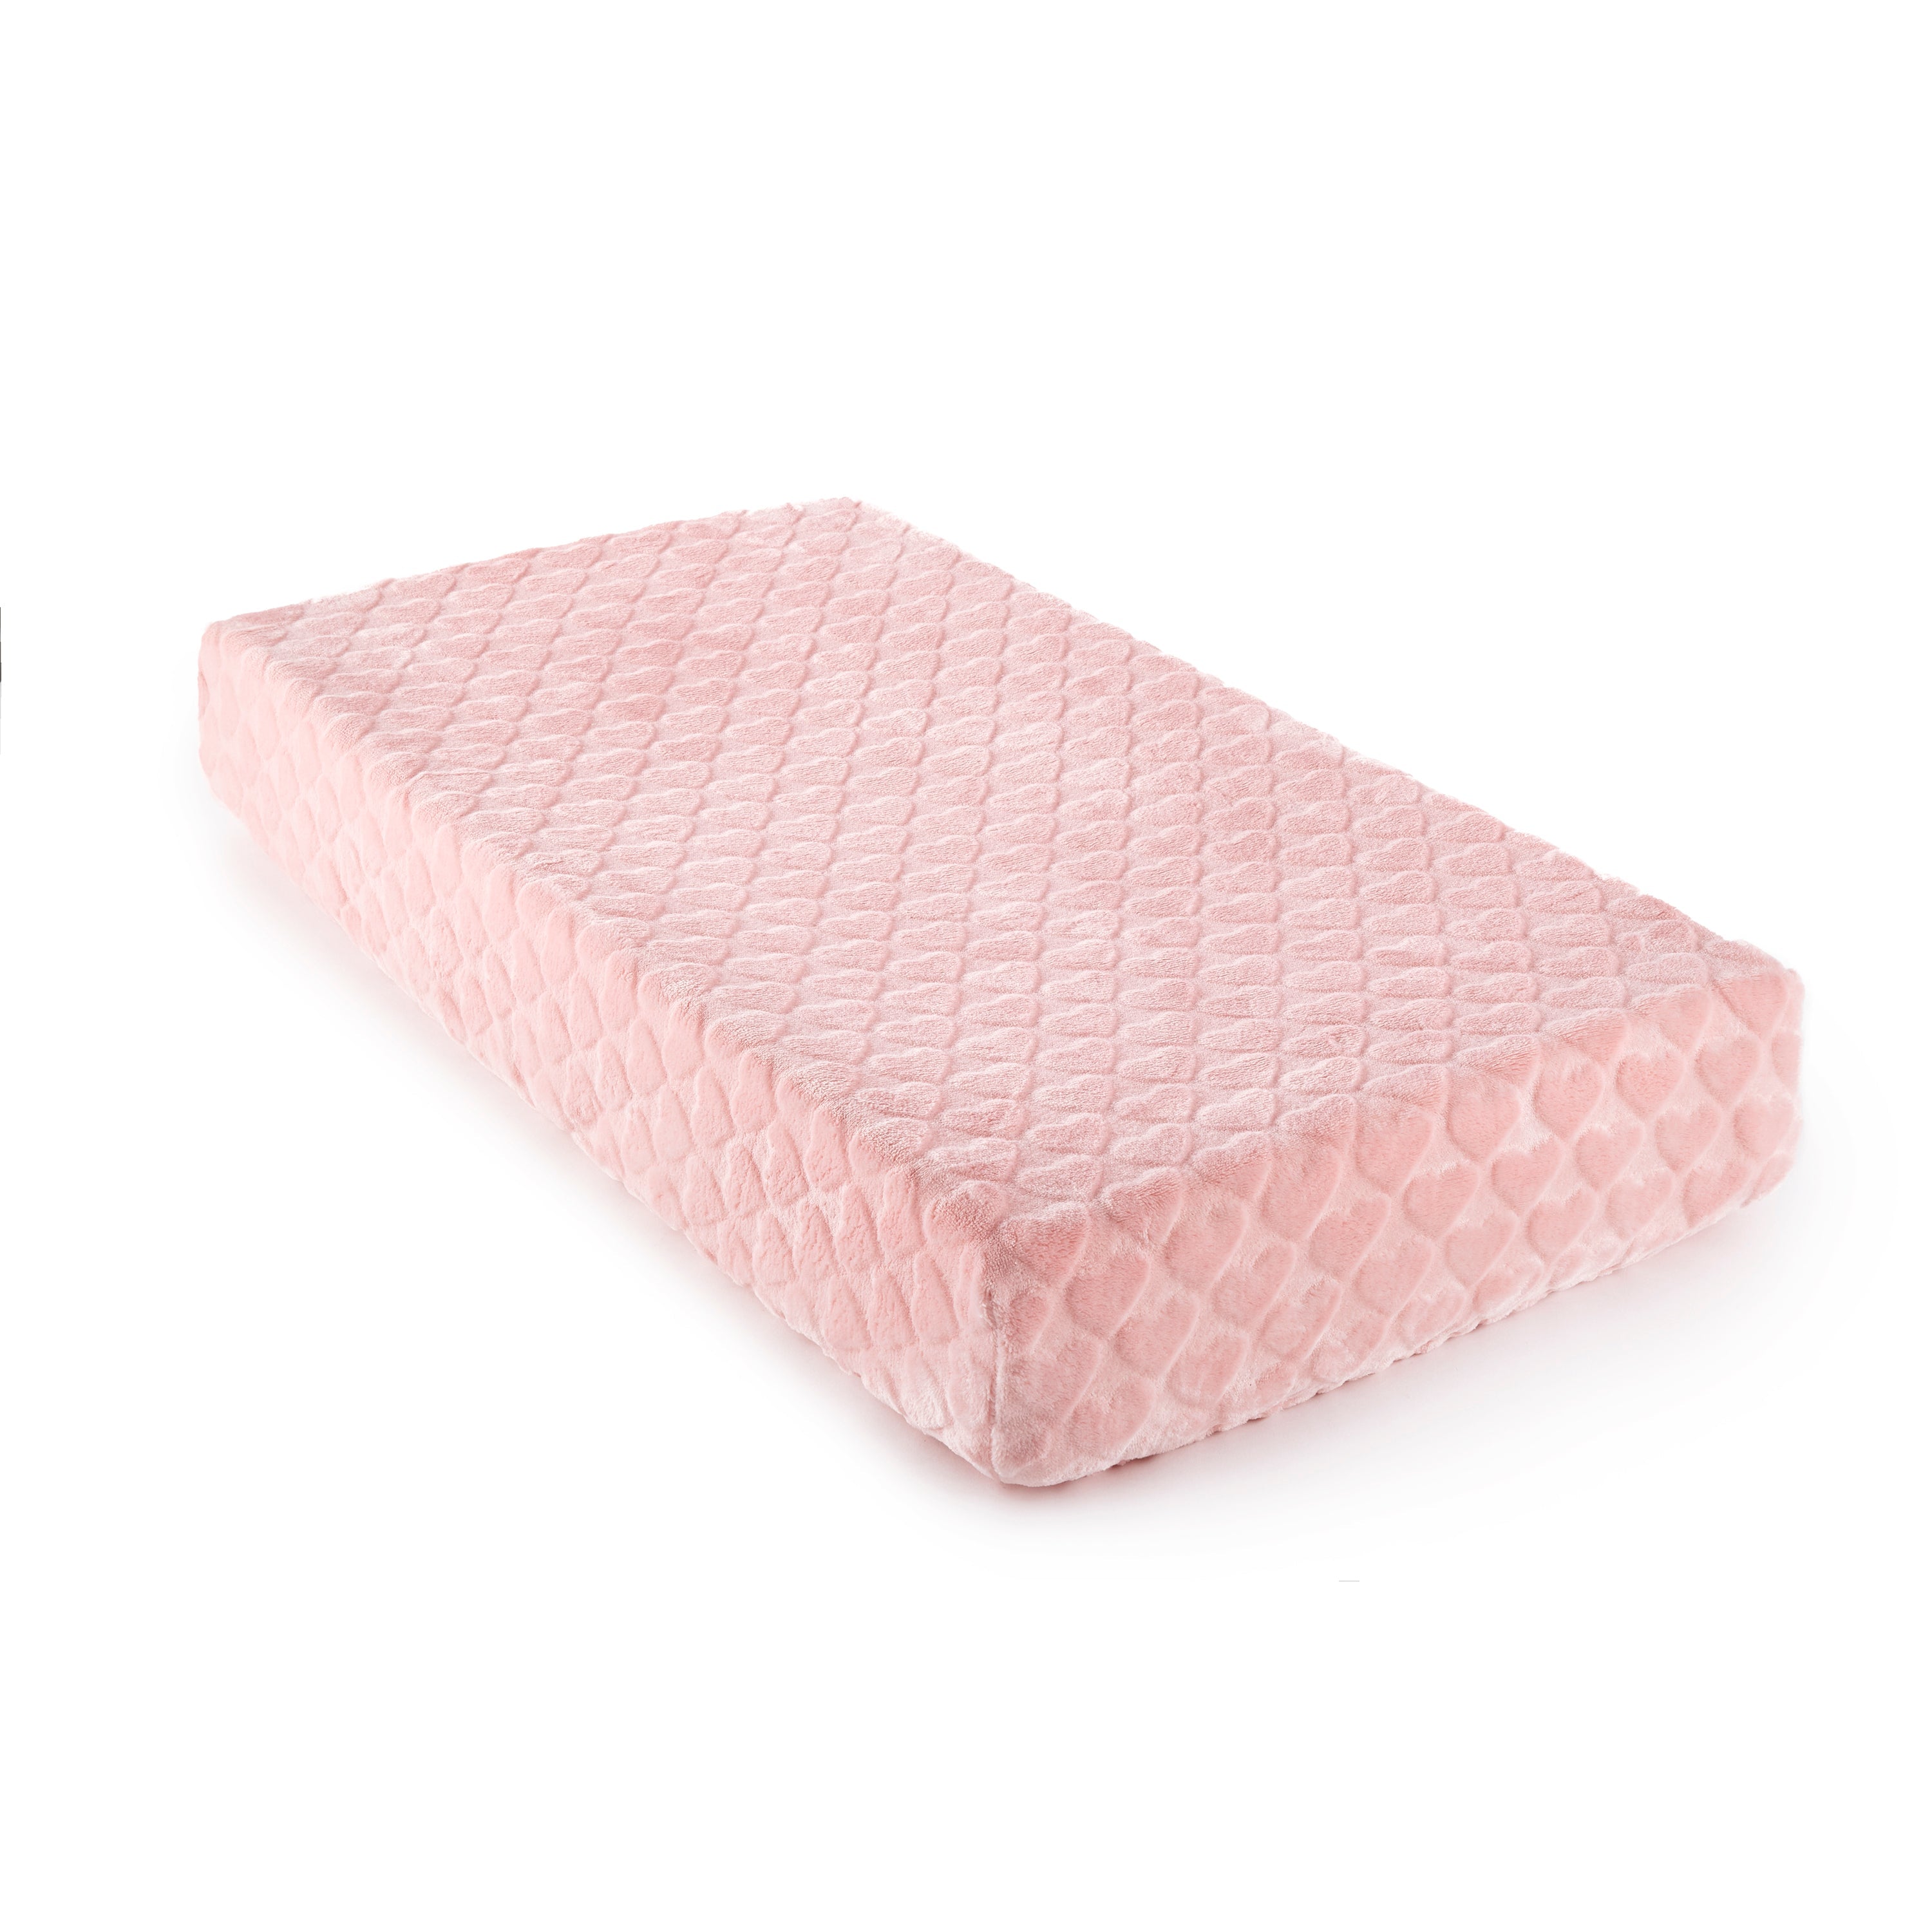 Coral Heart Change Pad Cover